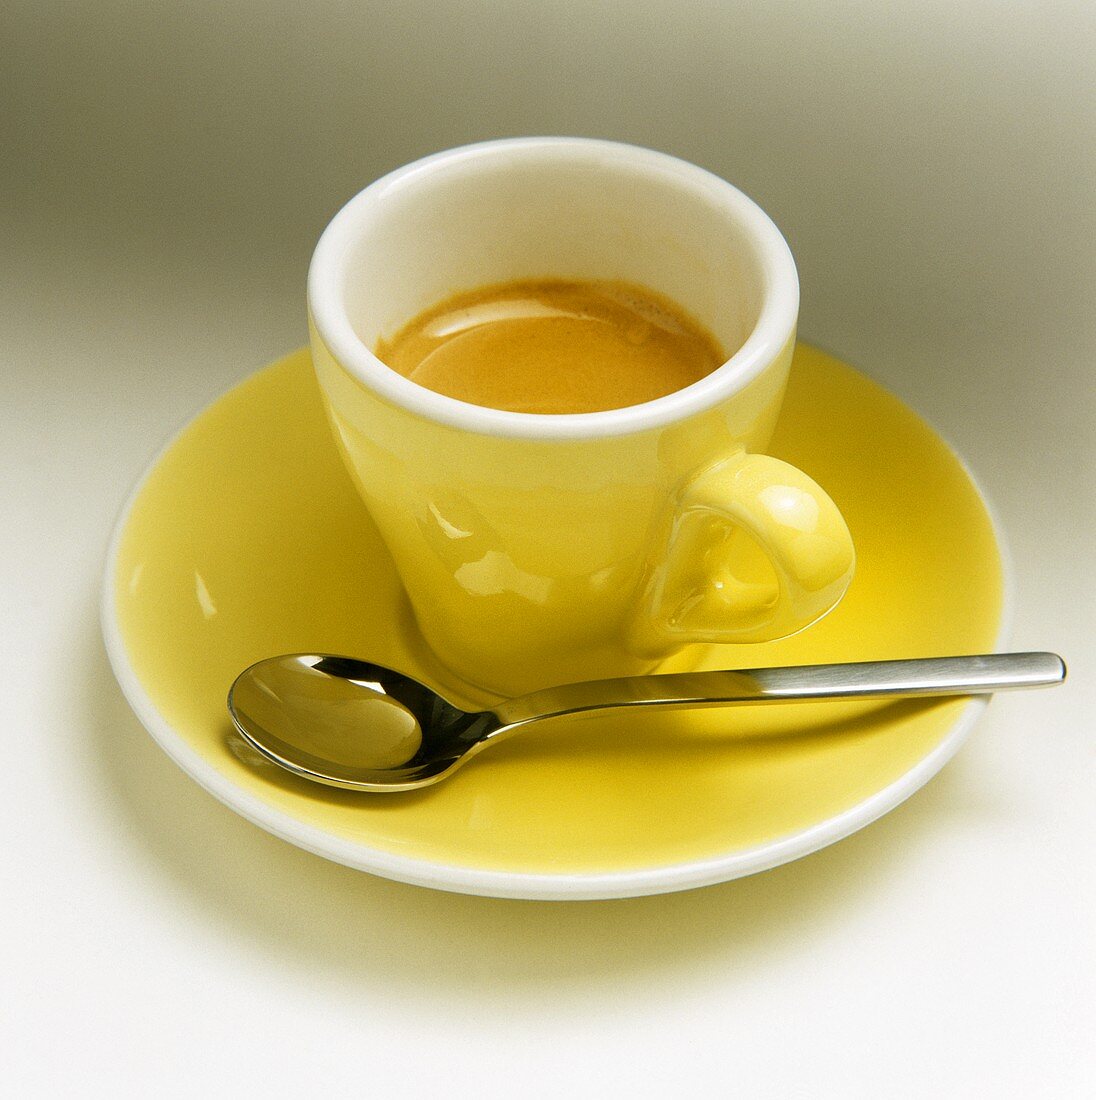 Espresso in a Yellow Cup; Spoon